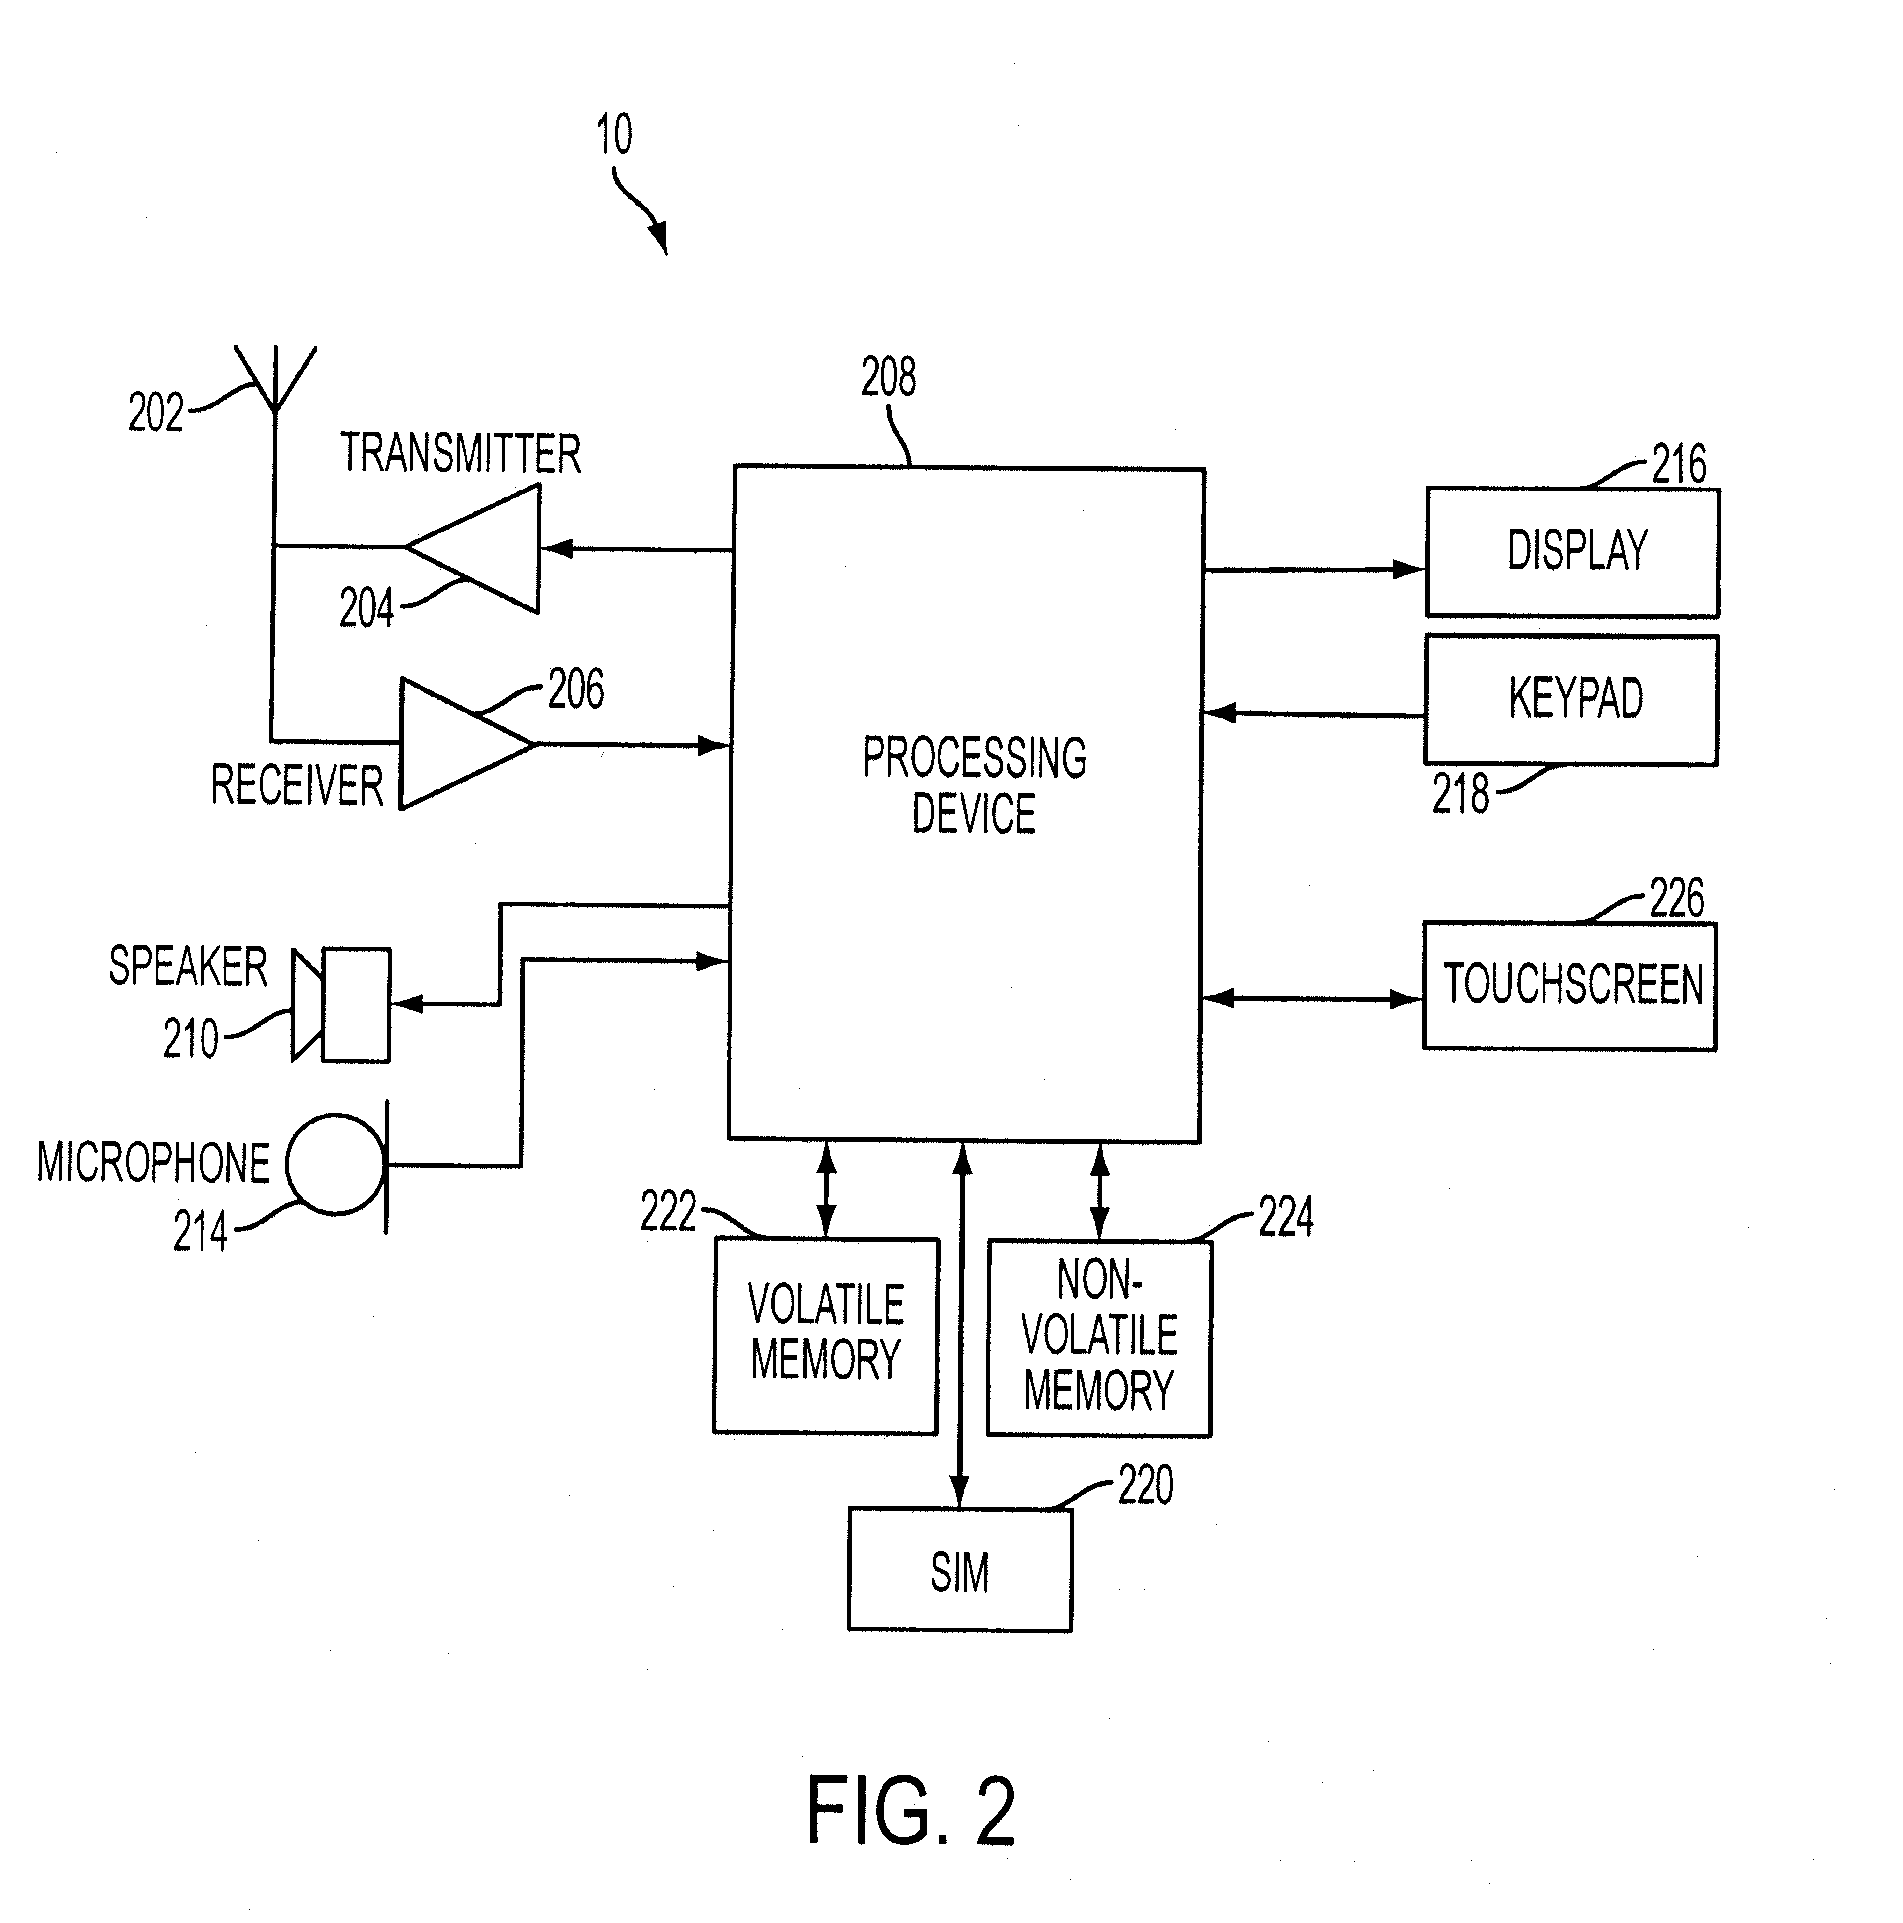 Apparatus, method and computer program product for facilitating drag-and-drop of an object